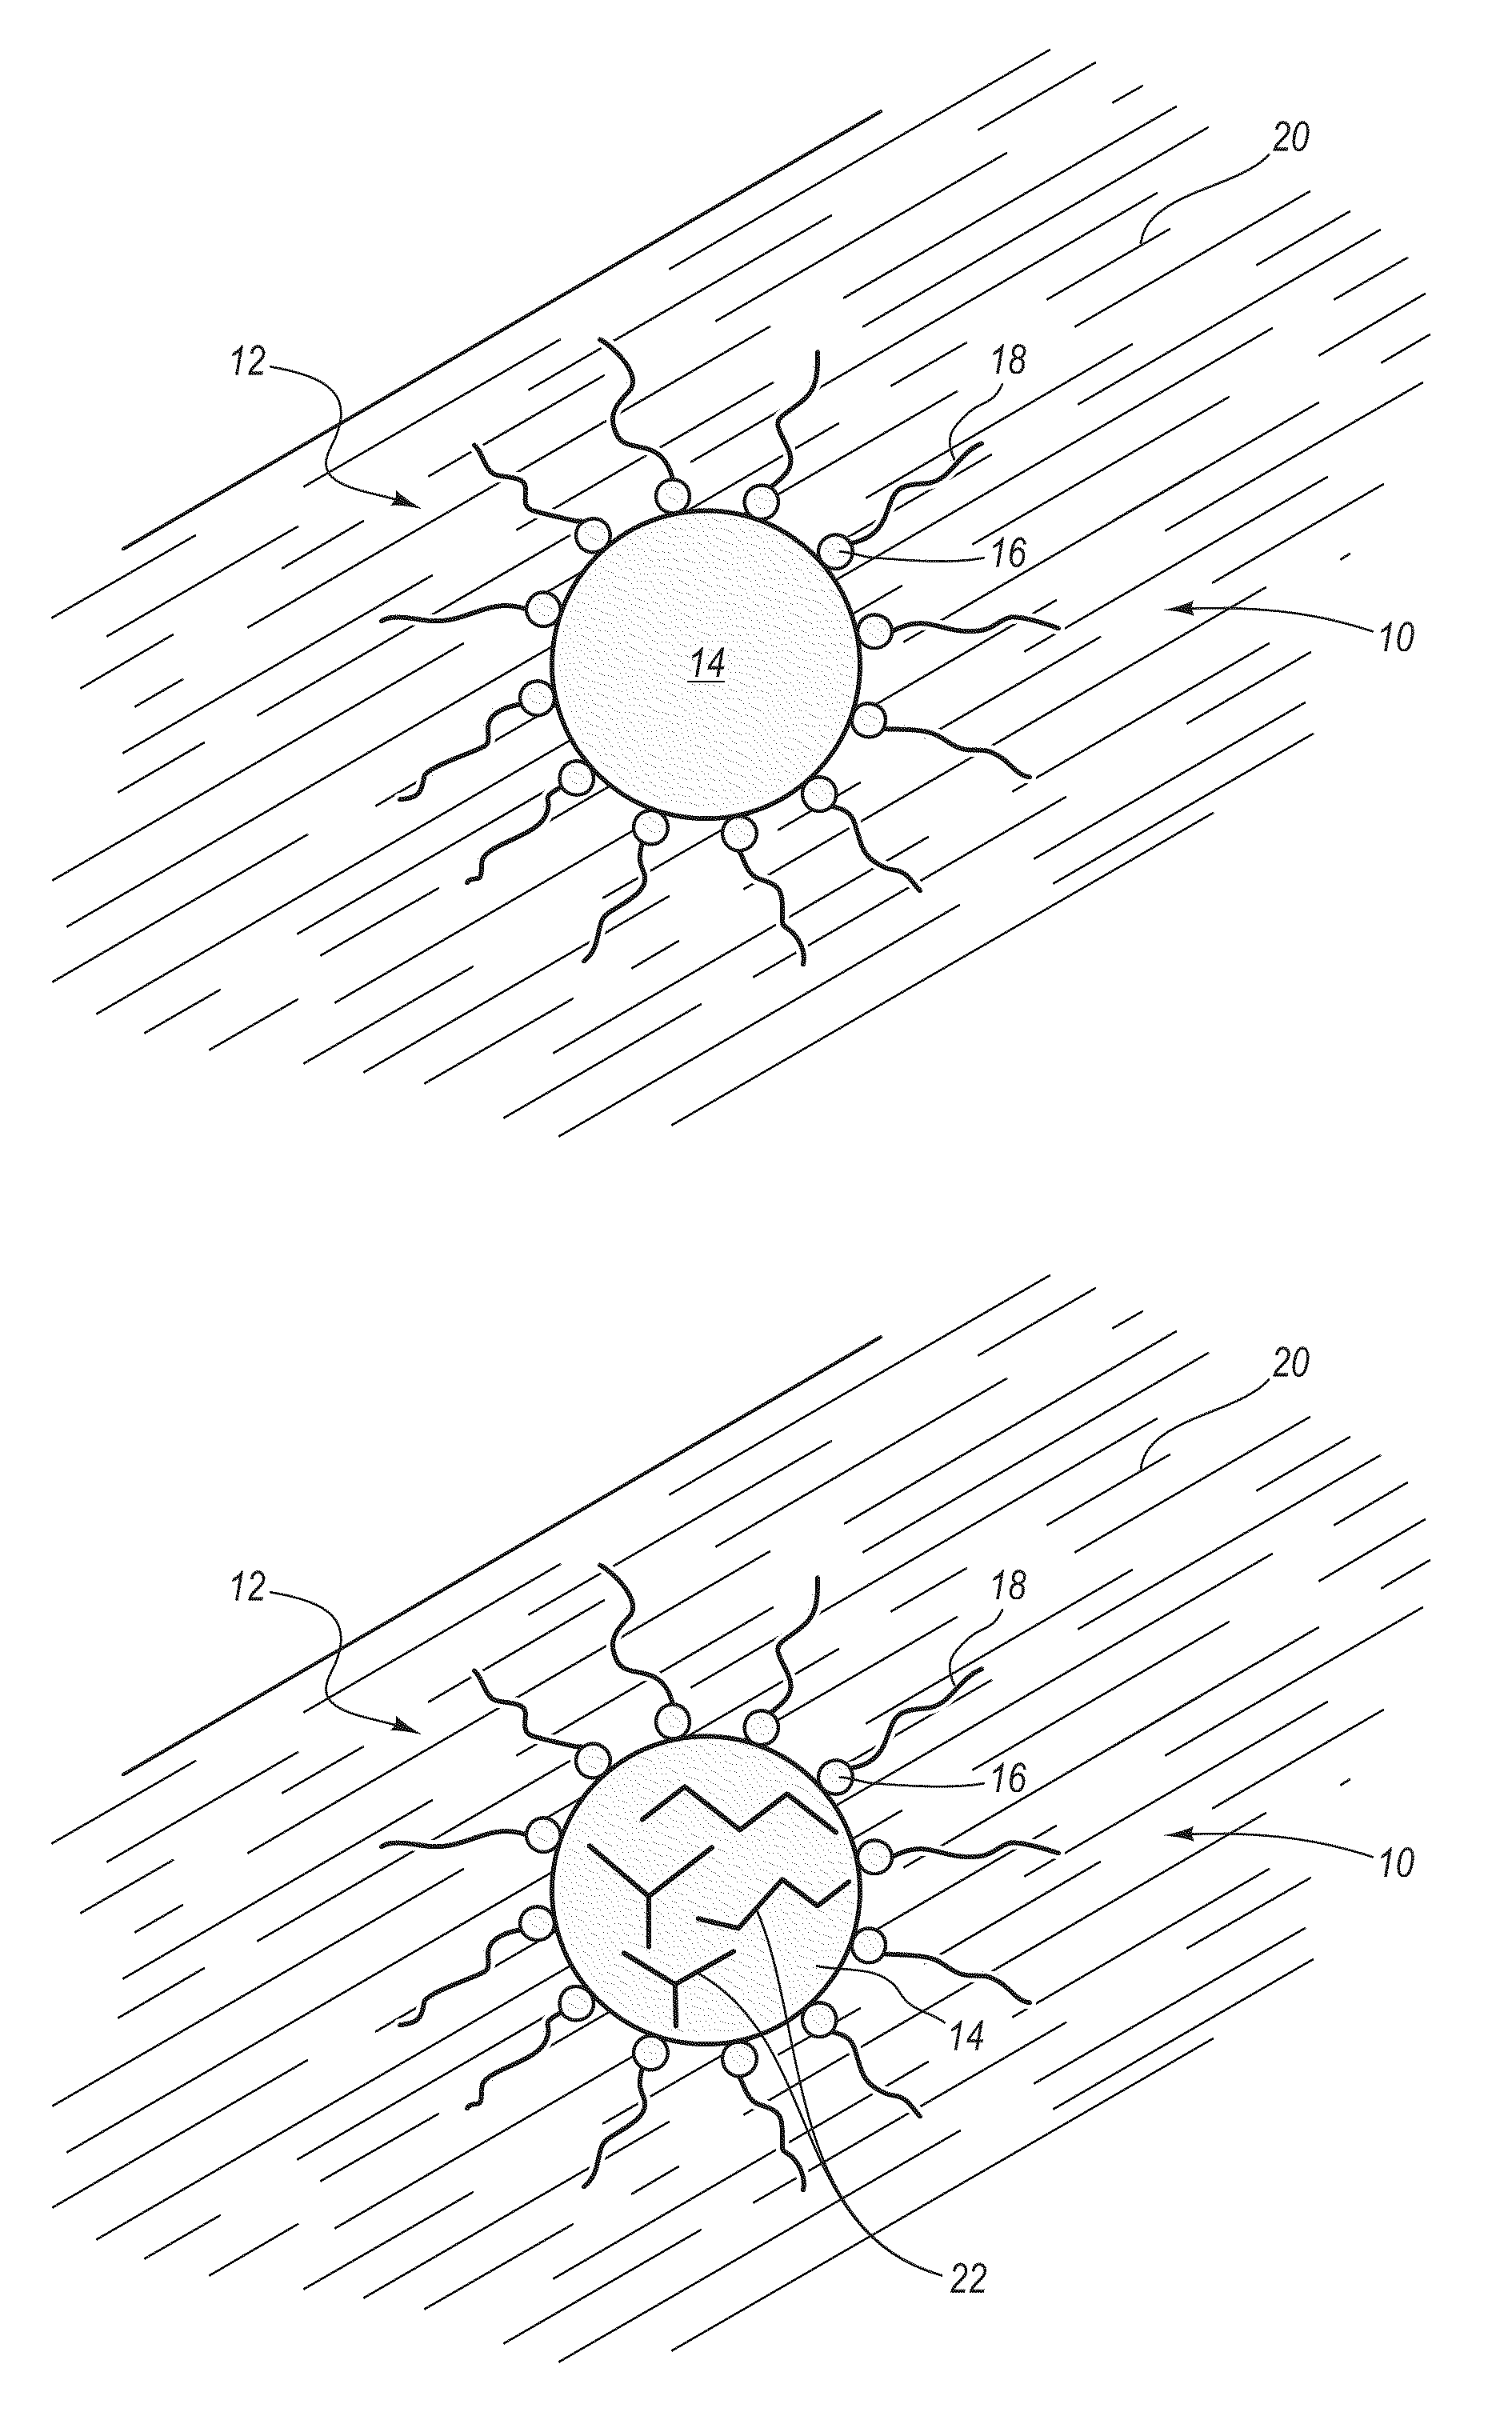 Preparation of a carbon nanomaterial using a reverse microemulsion